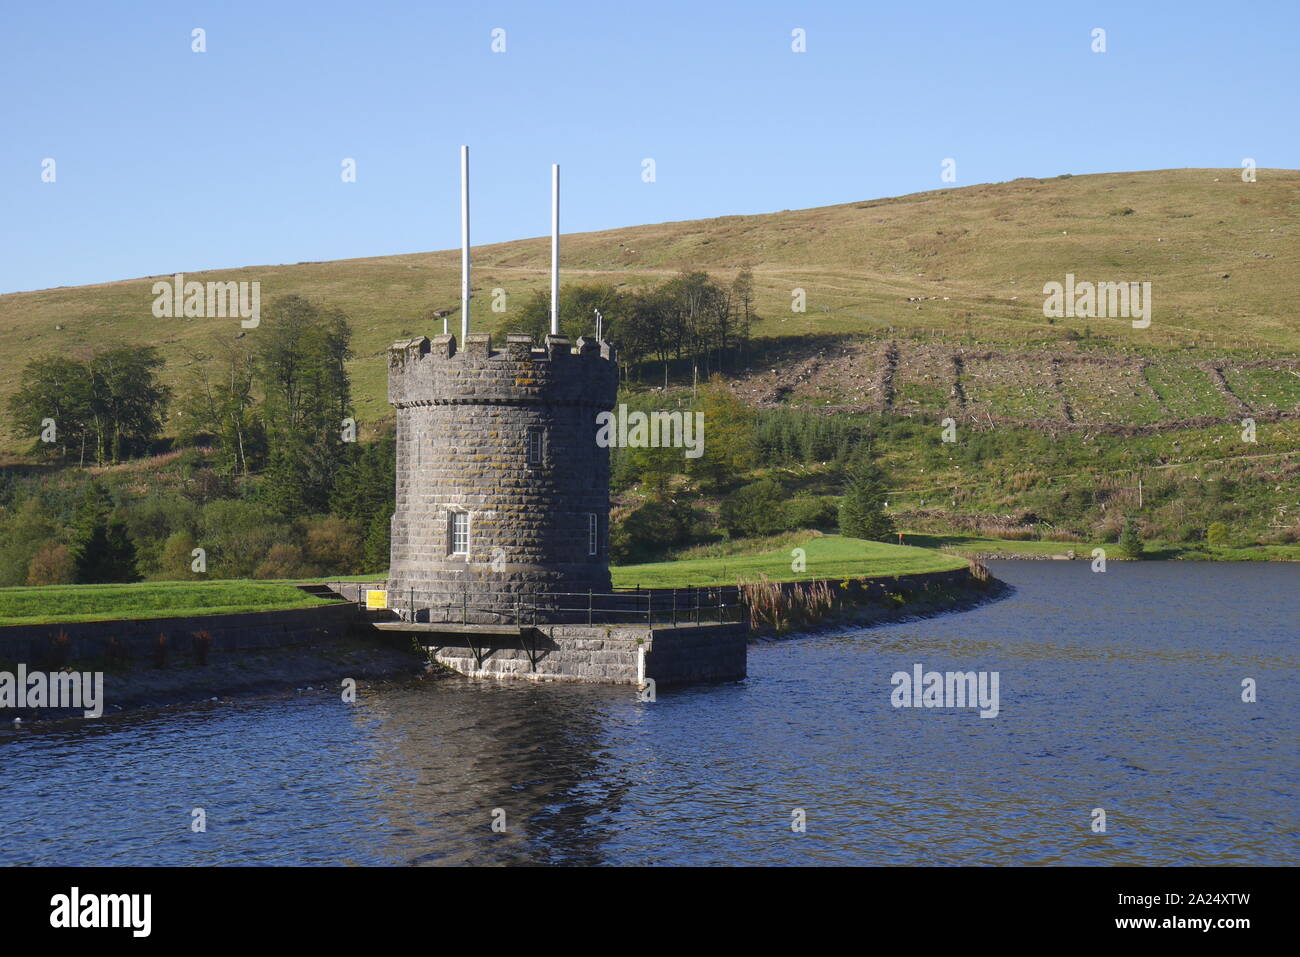 Valve tower, Llwyn On Reservoir, Brecon Beacons, Brecknockshire, South Wales, United Kingdom Stock Photo